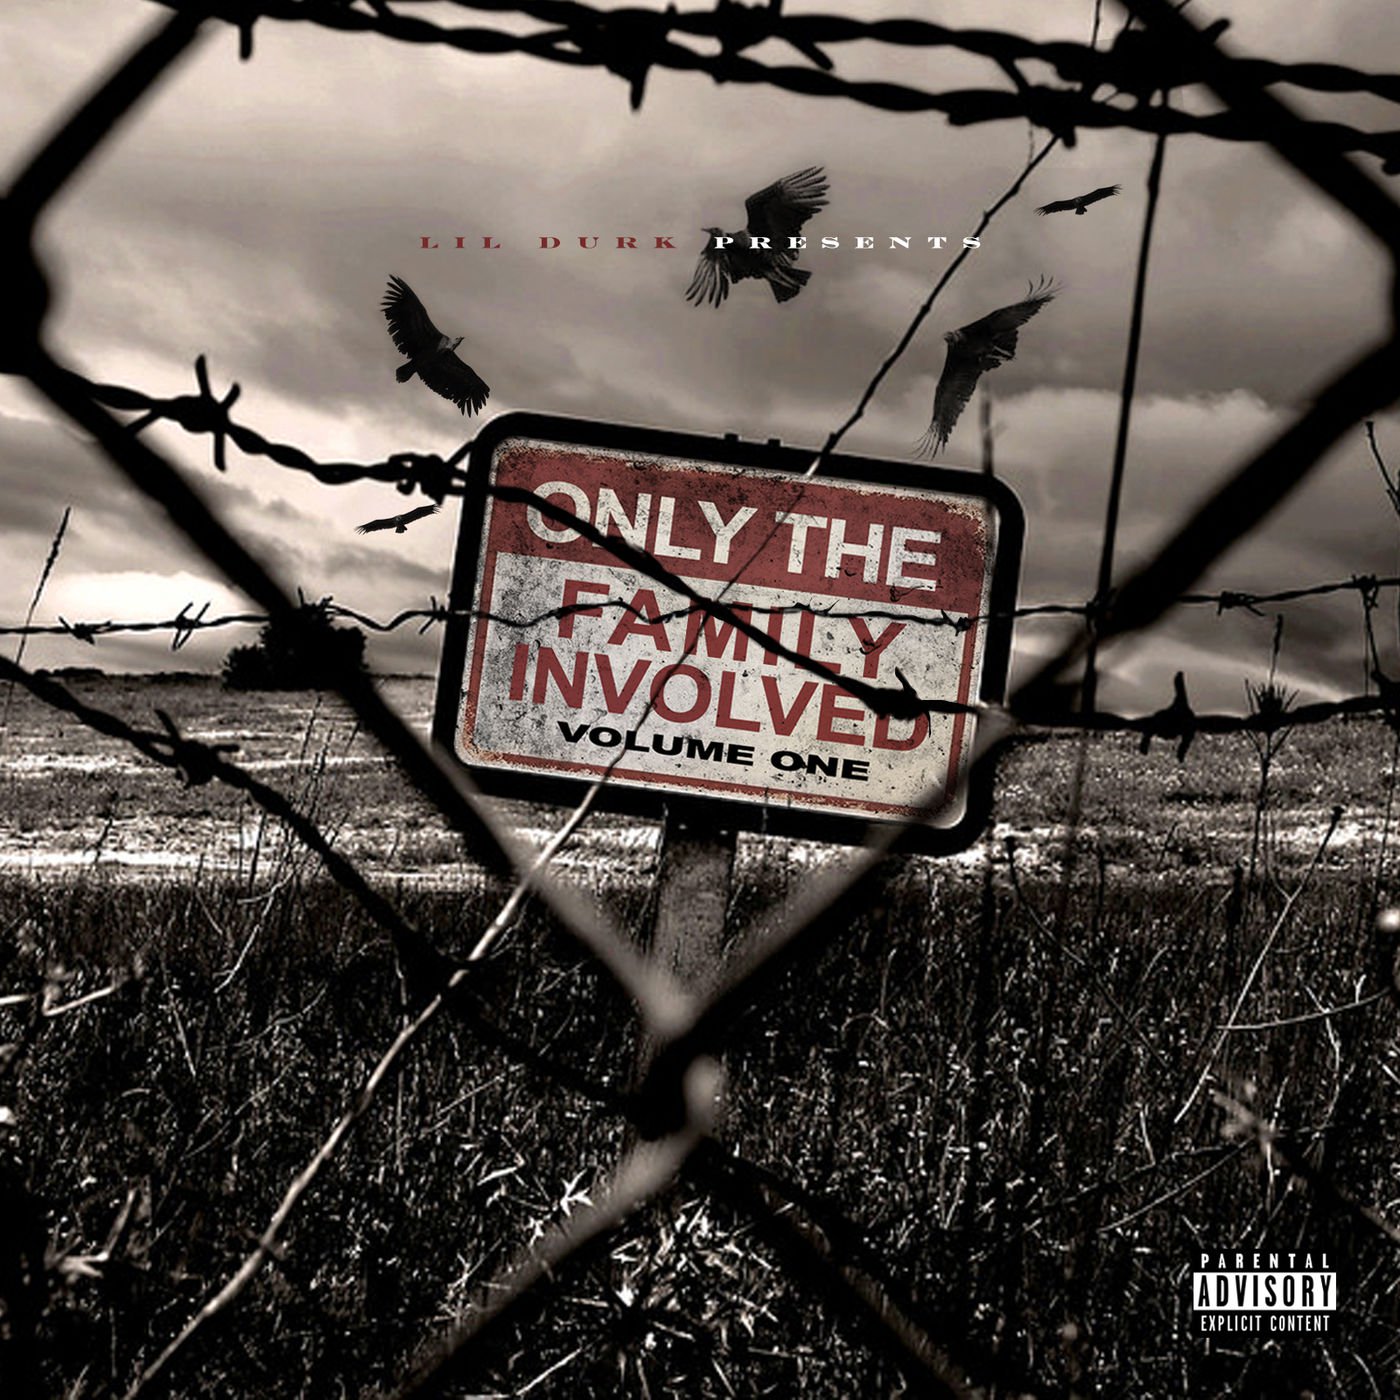 Lil Durk – Only the Family Involved, Vol. 1 [Album Stream]